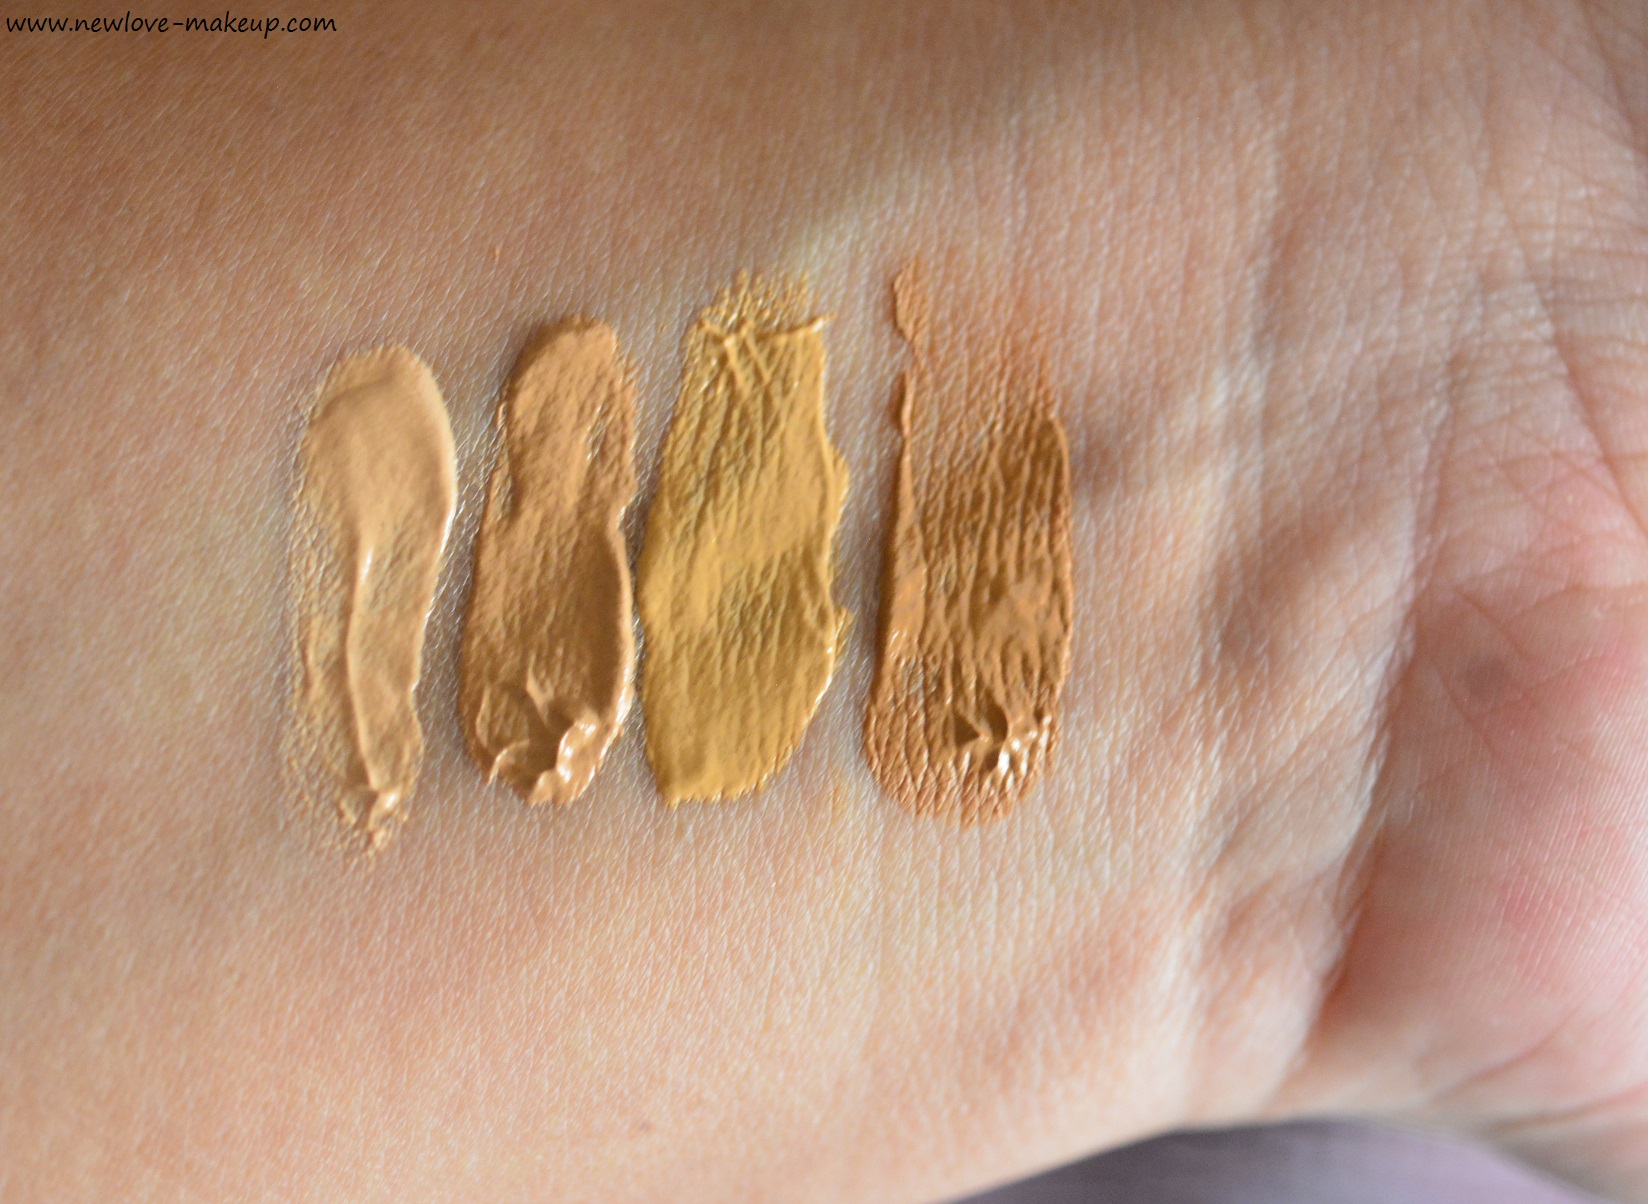 Sugar Cosmetics Goddess of Flawless SPF30+ BB Cream Review, Swatches